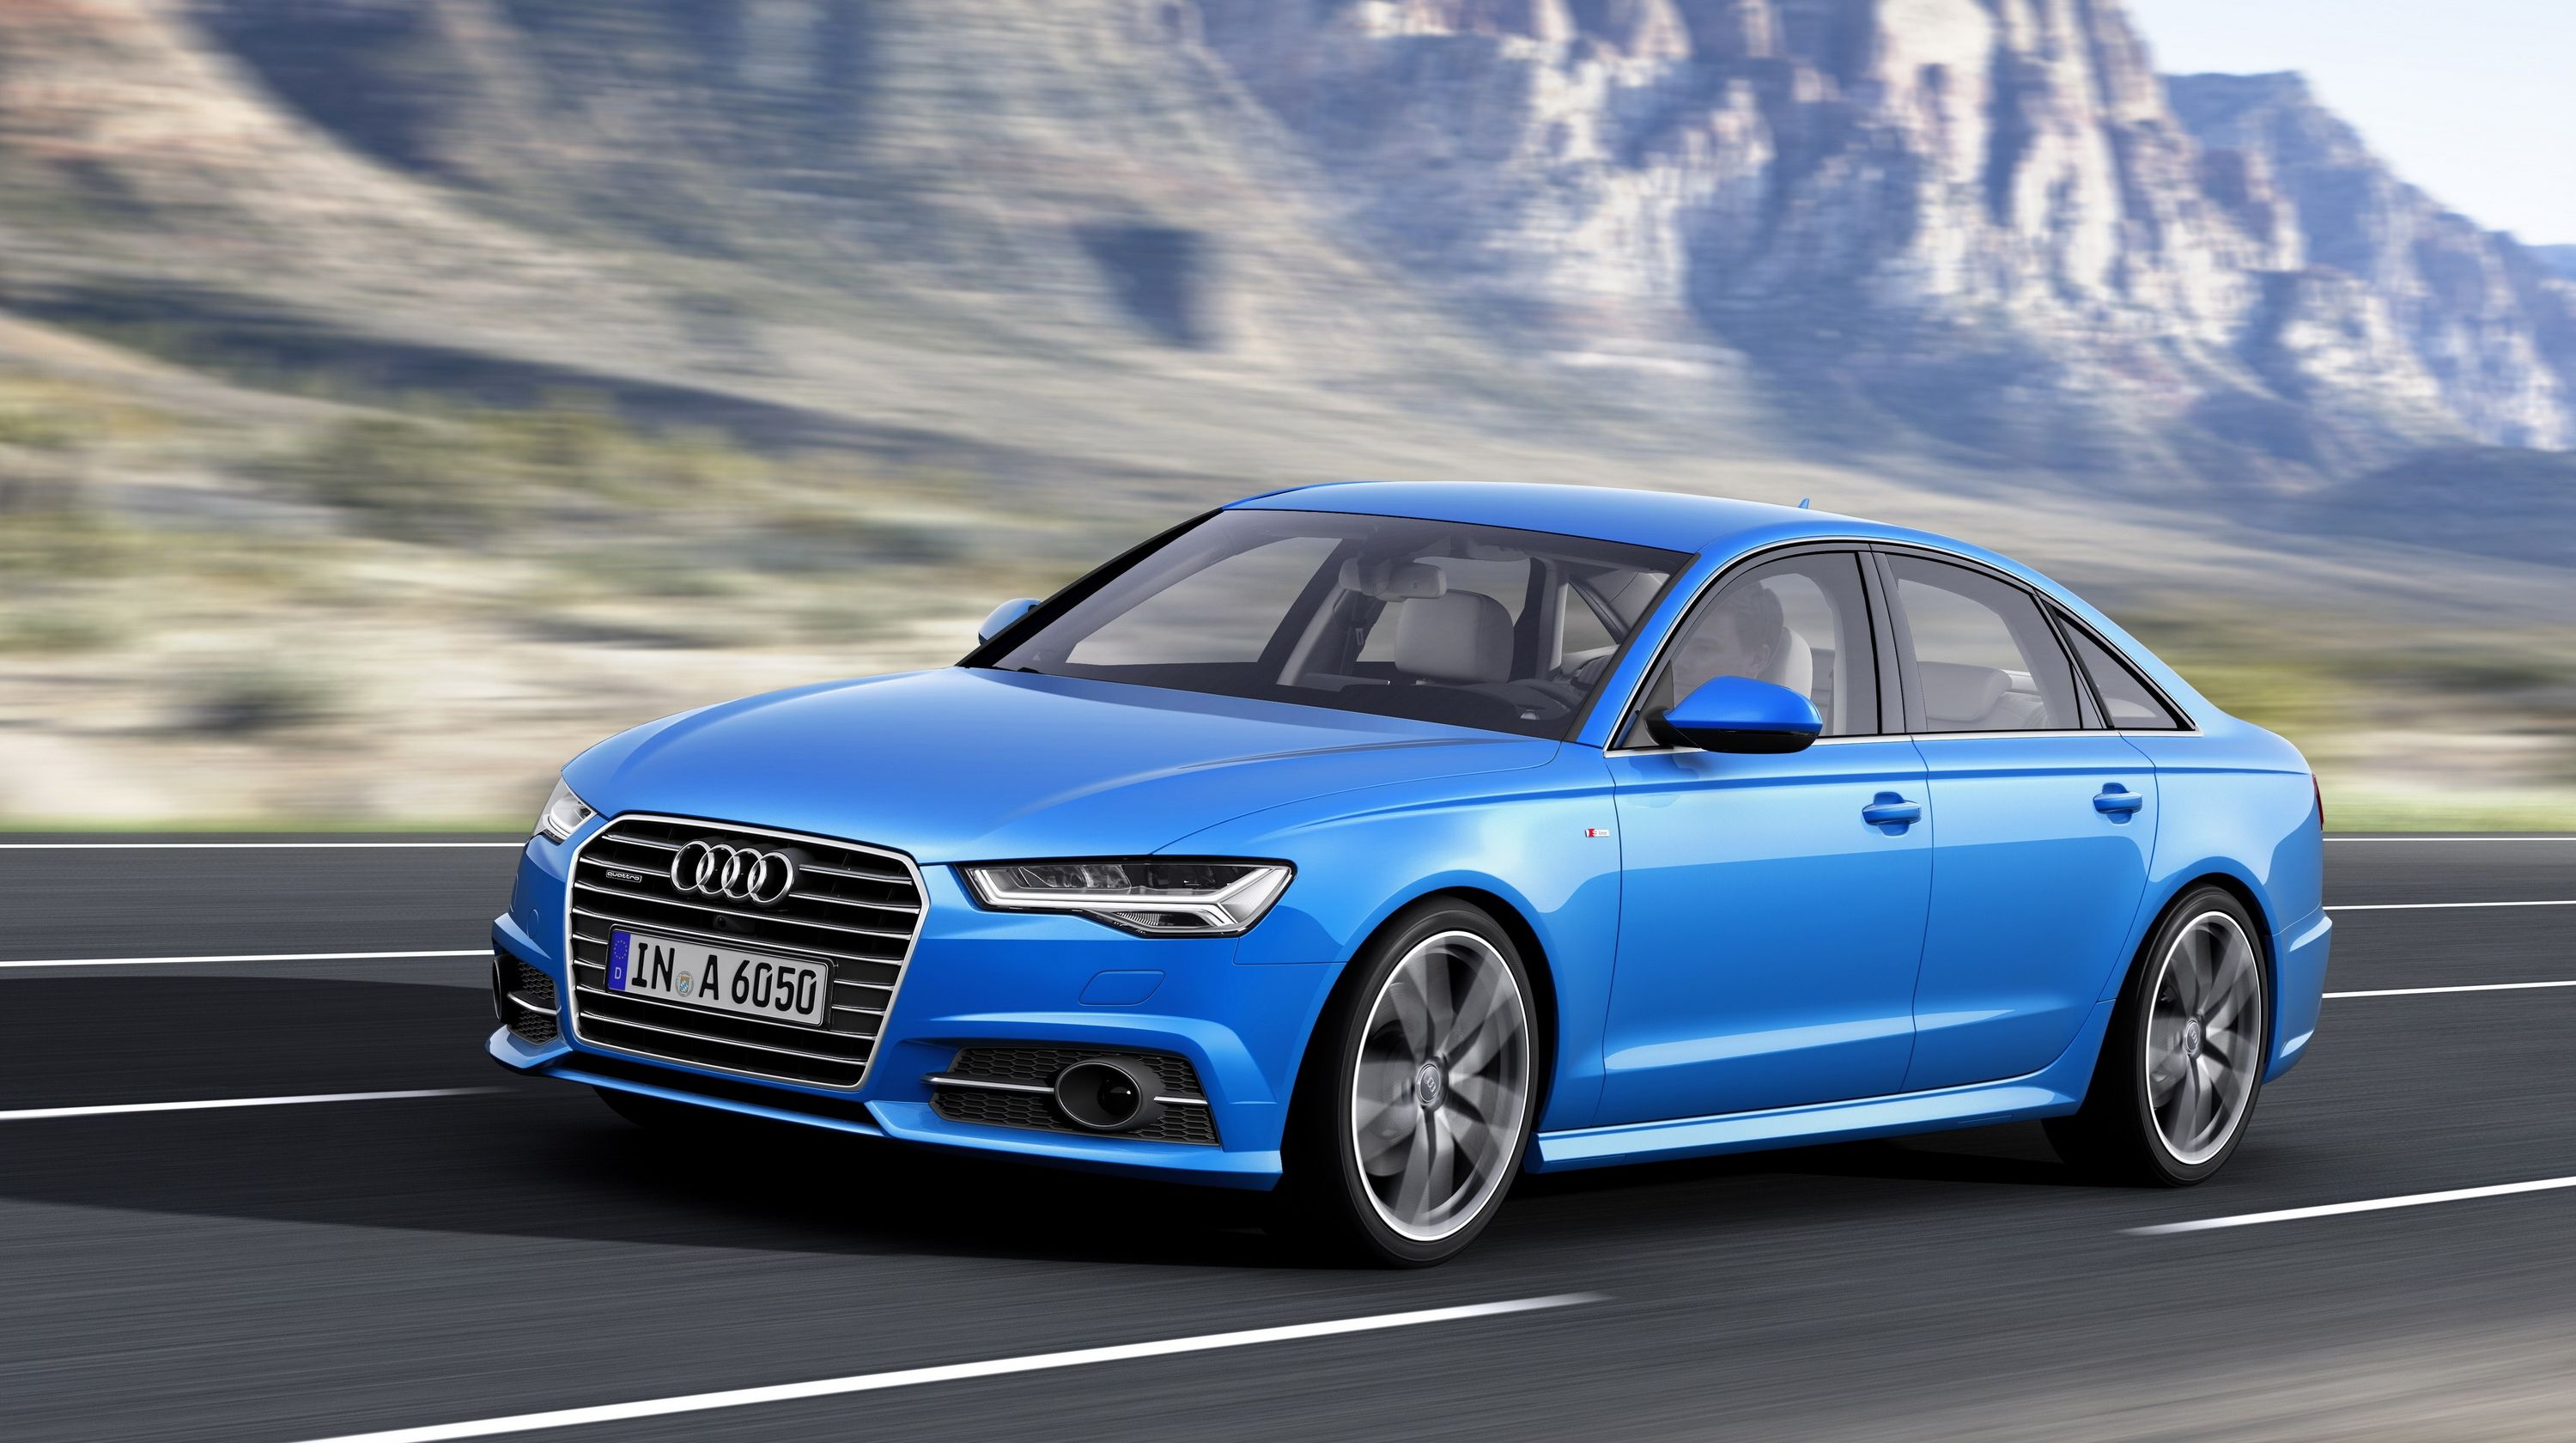  Audi is already moving to the 2016 model year, as it will unveil the slightly revised 2016 A6 at the 2015 LA Auto Show. 